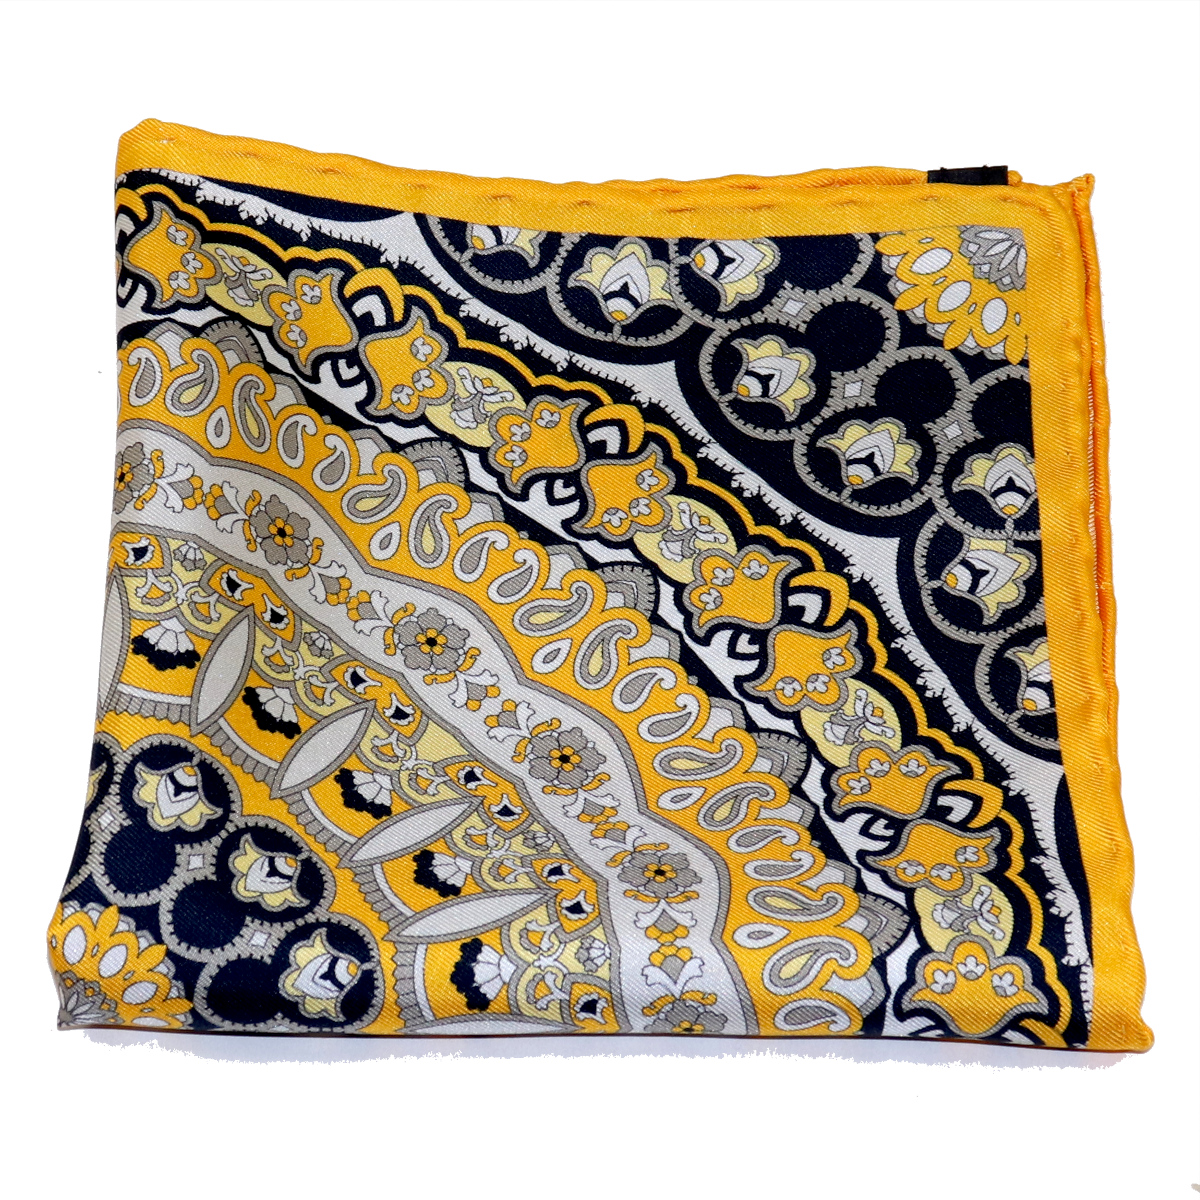 Pocket Square Hanky Silver Yellow Blue White Patterned Silk Handkerchief 